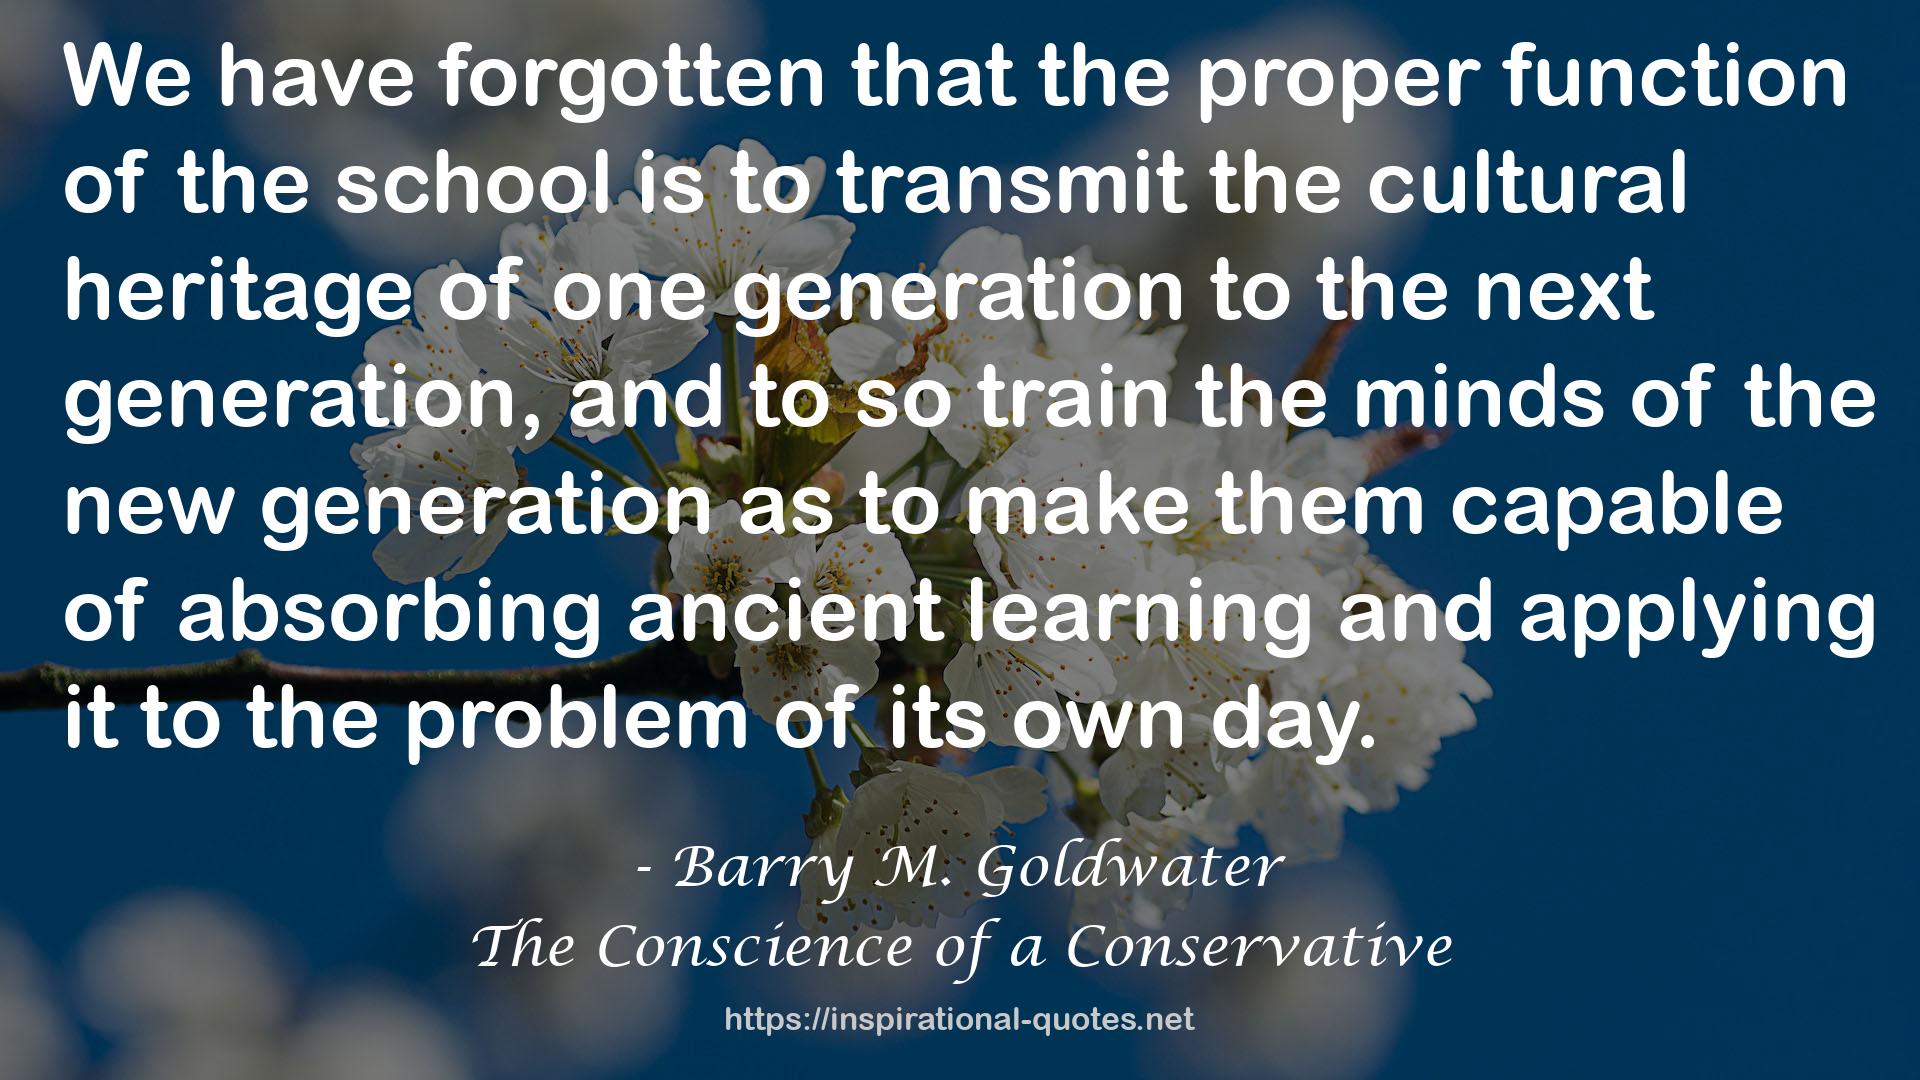 The Conscience of a Conservative QUOTES